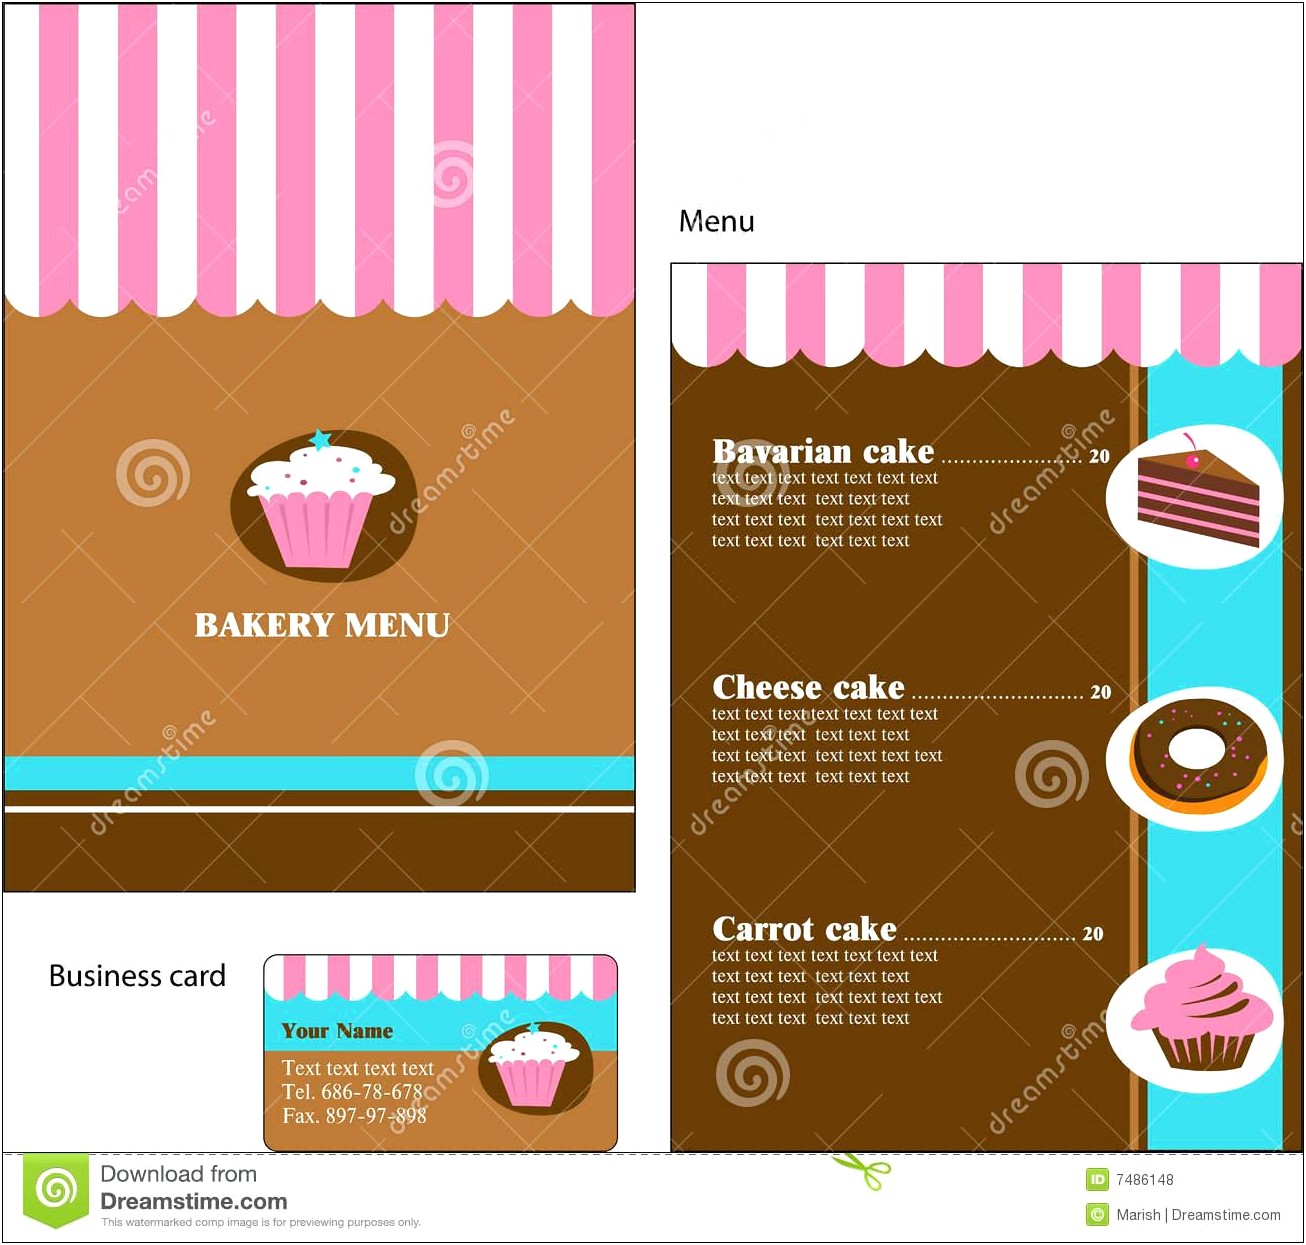 cafe-menu-templates-free-download-word-resume-example-gallery